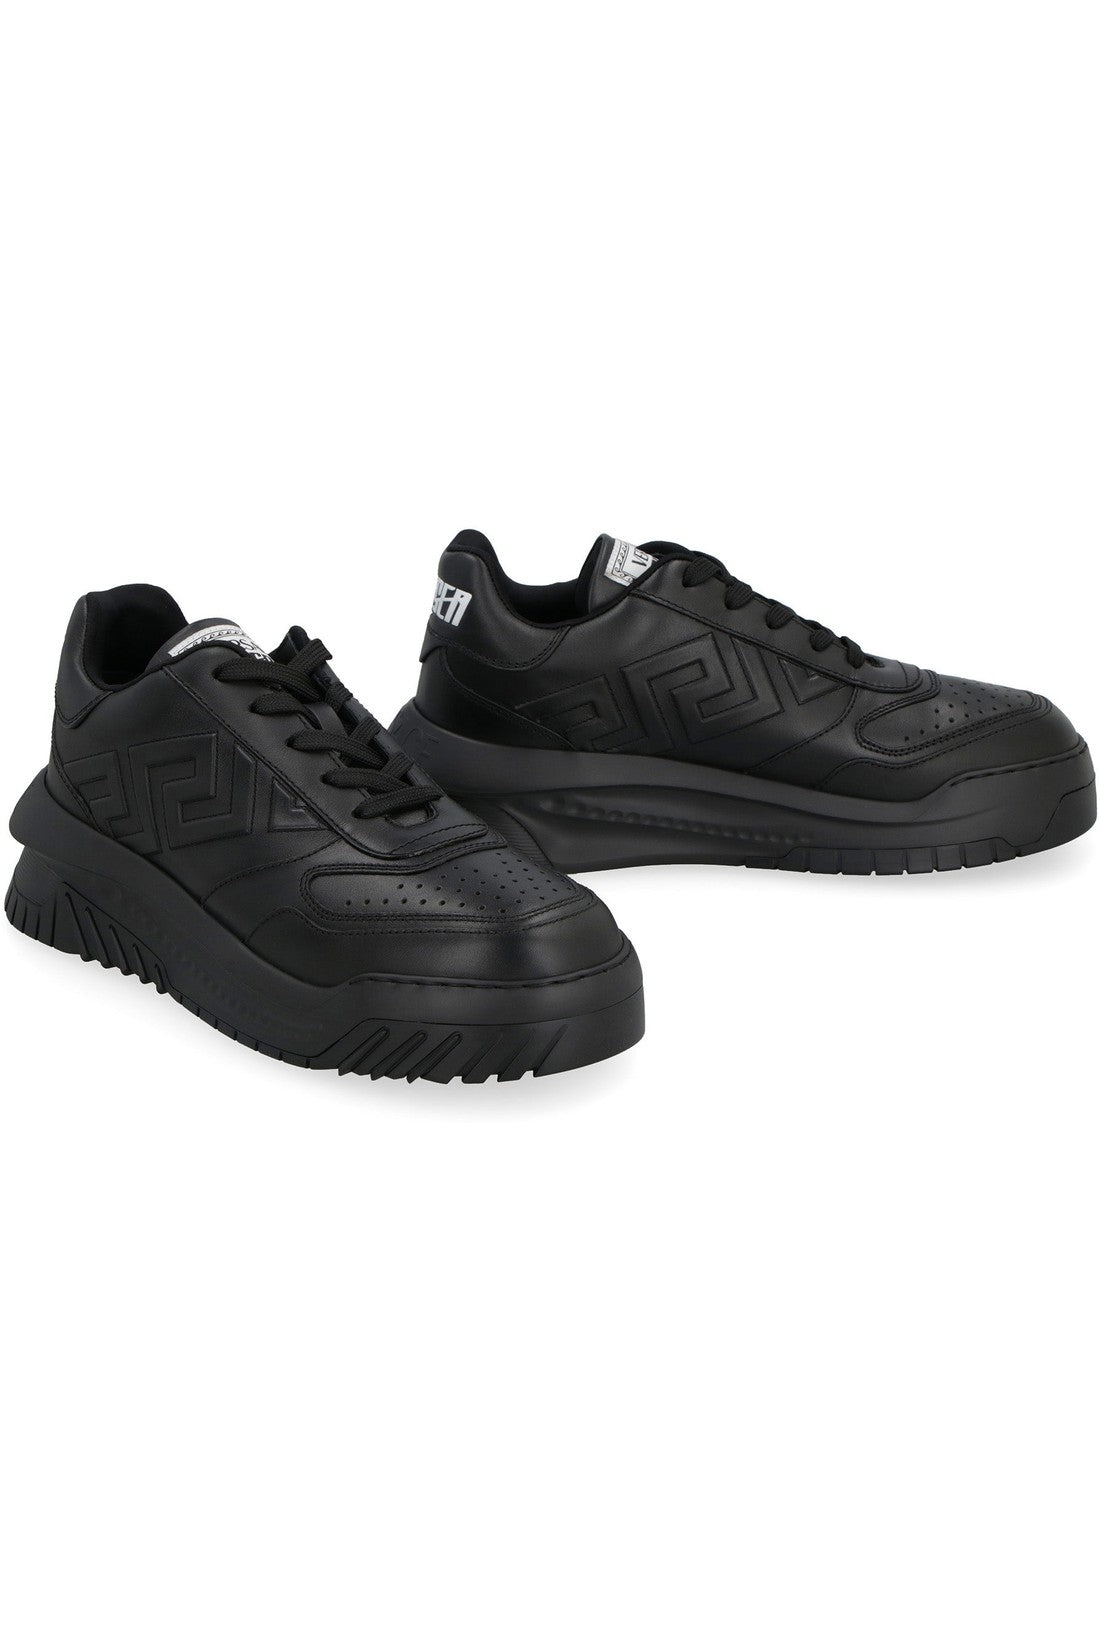 Versace-OUTLET-SALE-Odissea leather low-top sneakers-ARCHIVIST